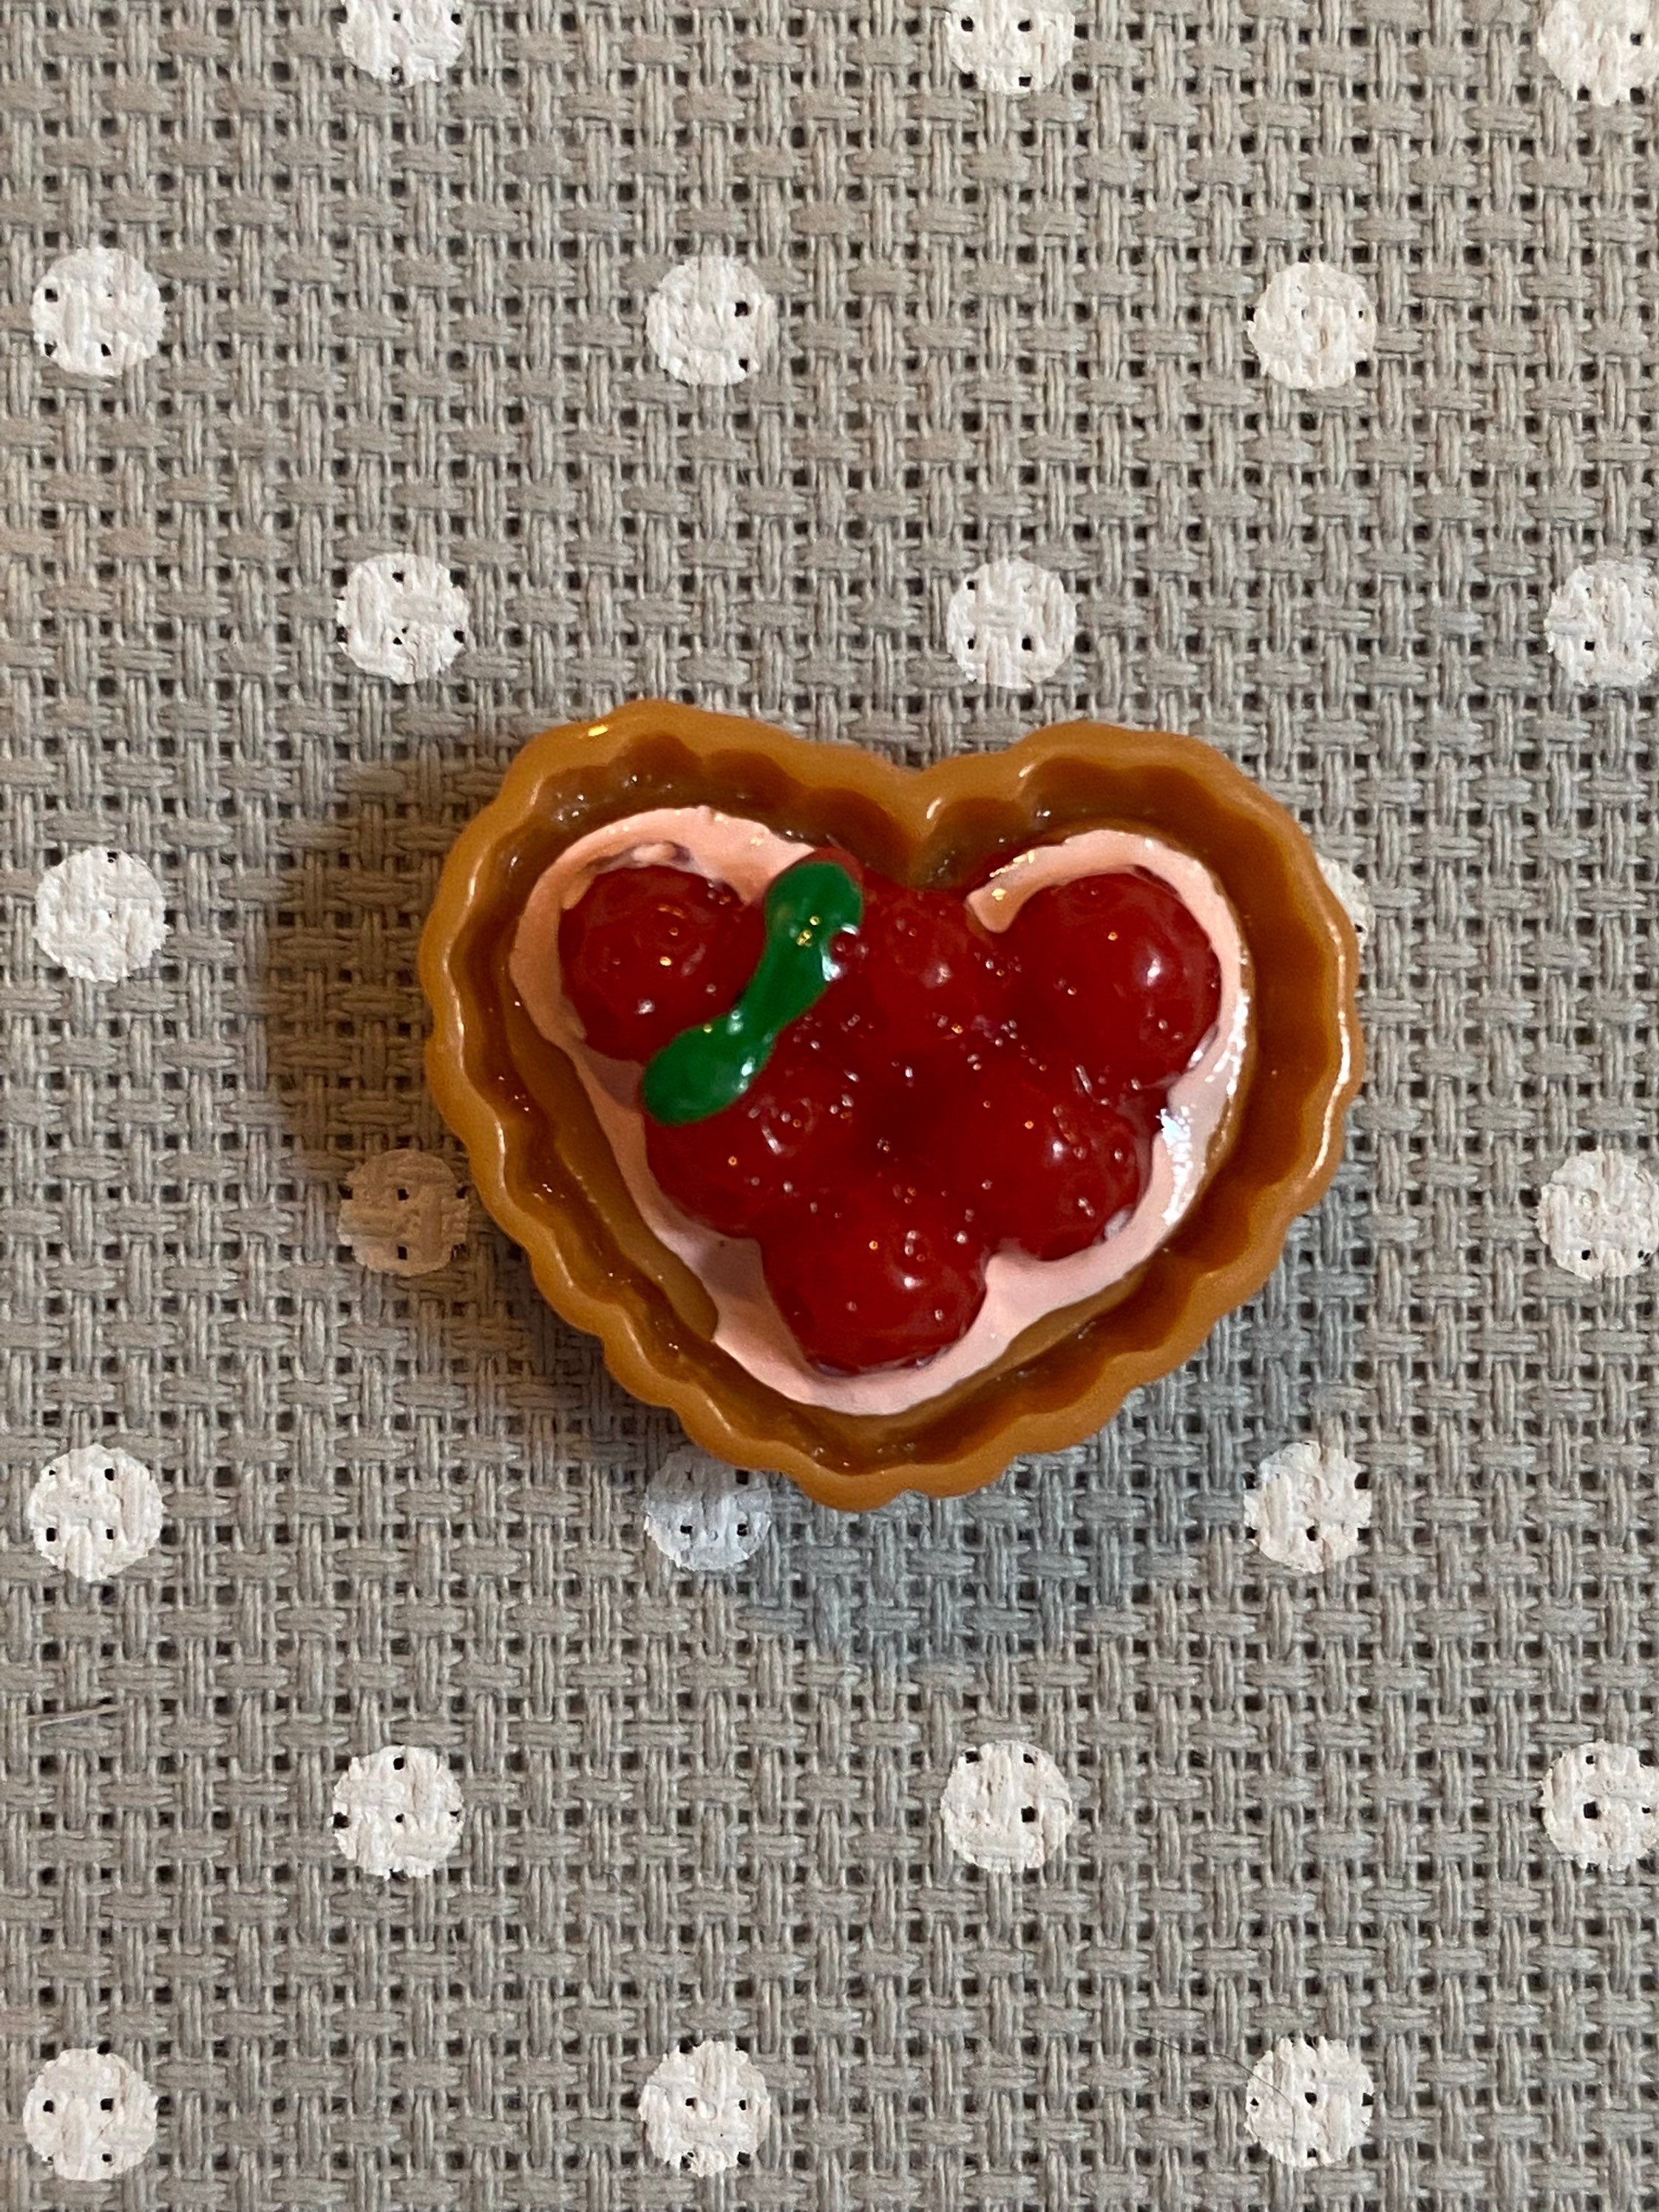 Strawberry Tart / 3d / Food / Dessert / Cake / Sweets / Needleminders /  Needleminder / Needle Minders / Magnetic/ Cross Stitch/ Embroidery 